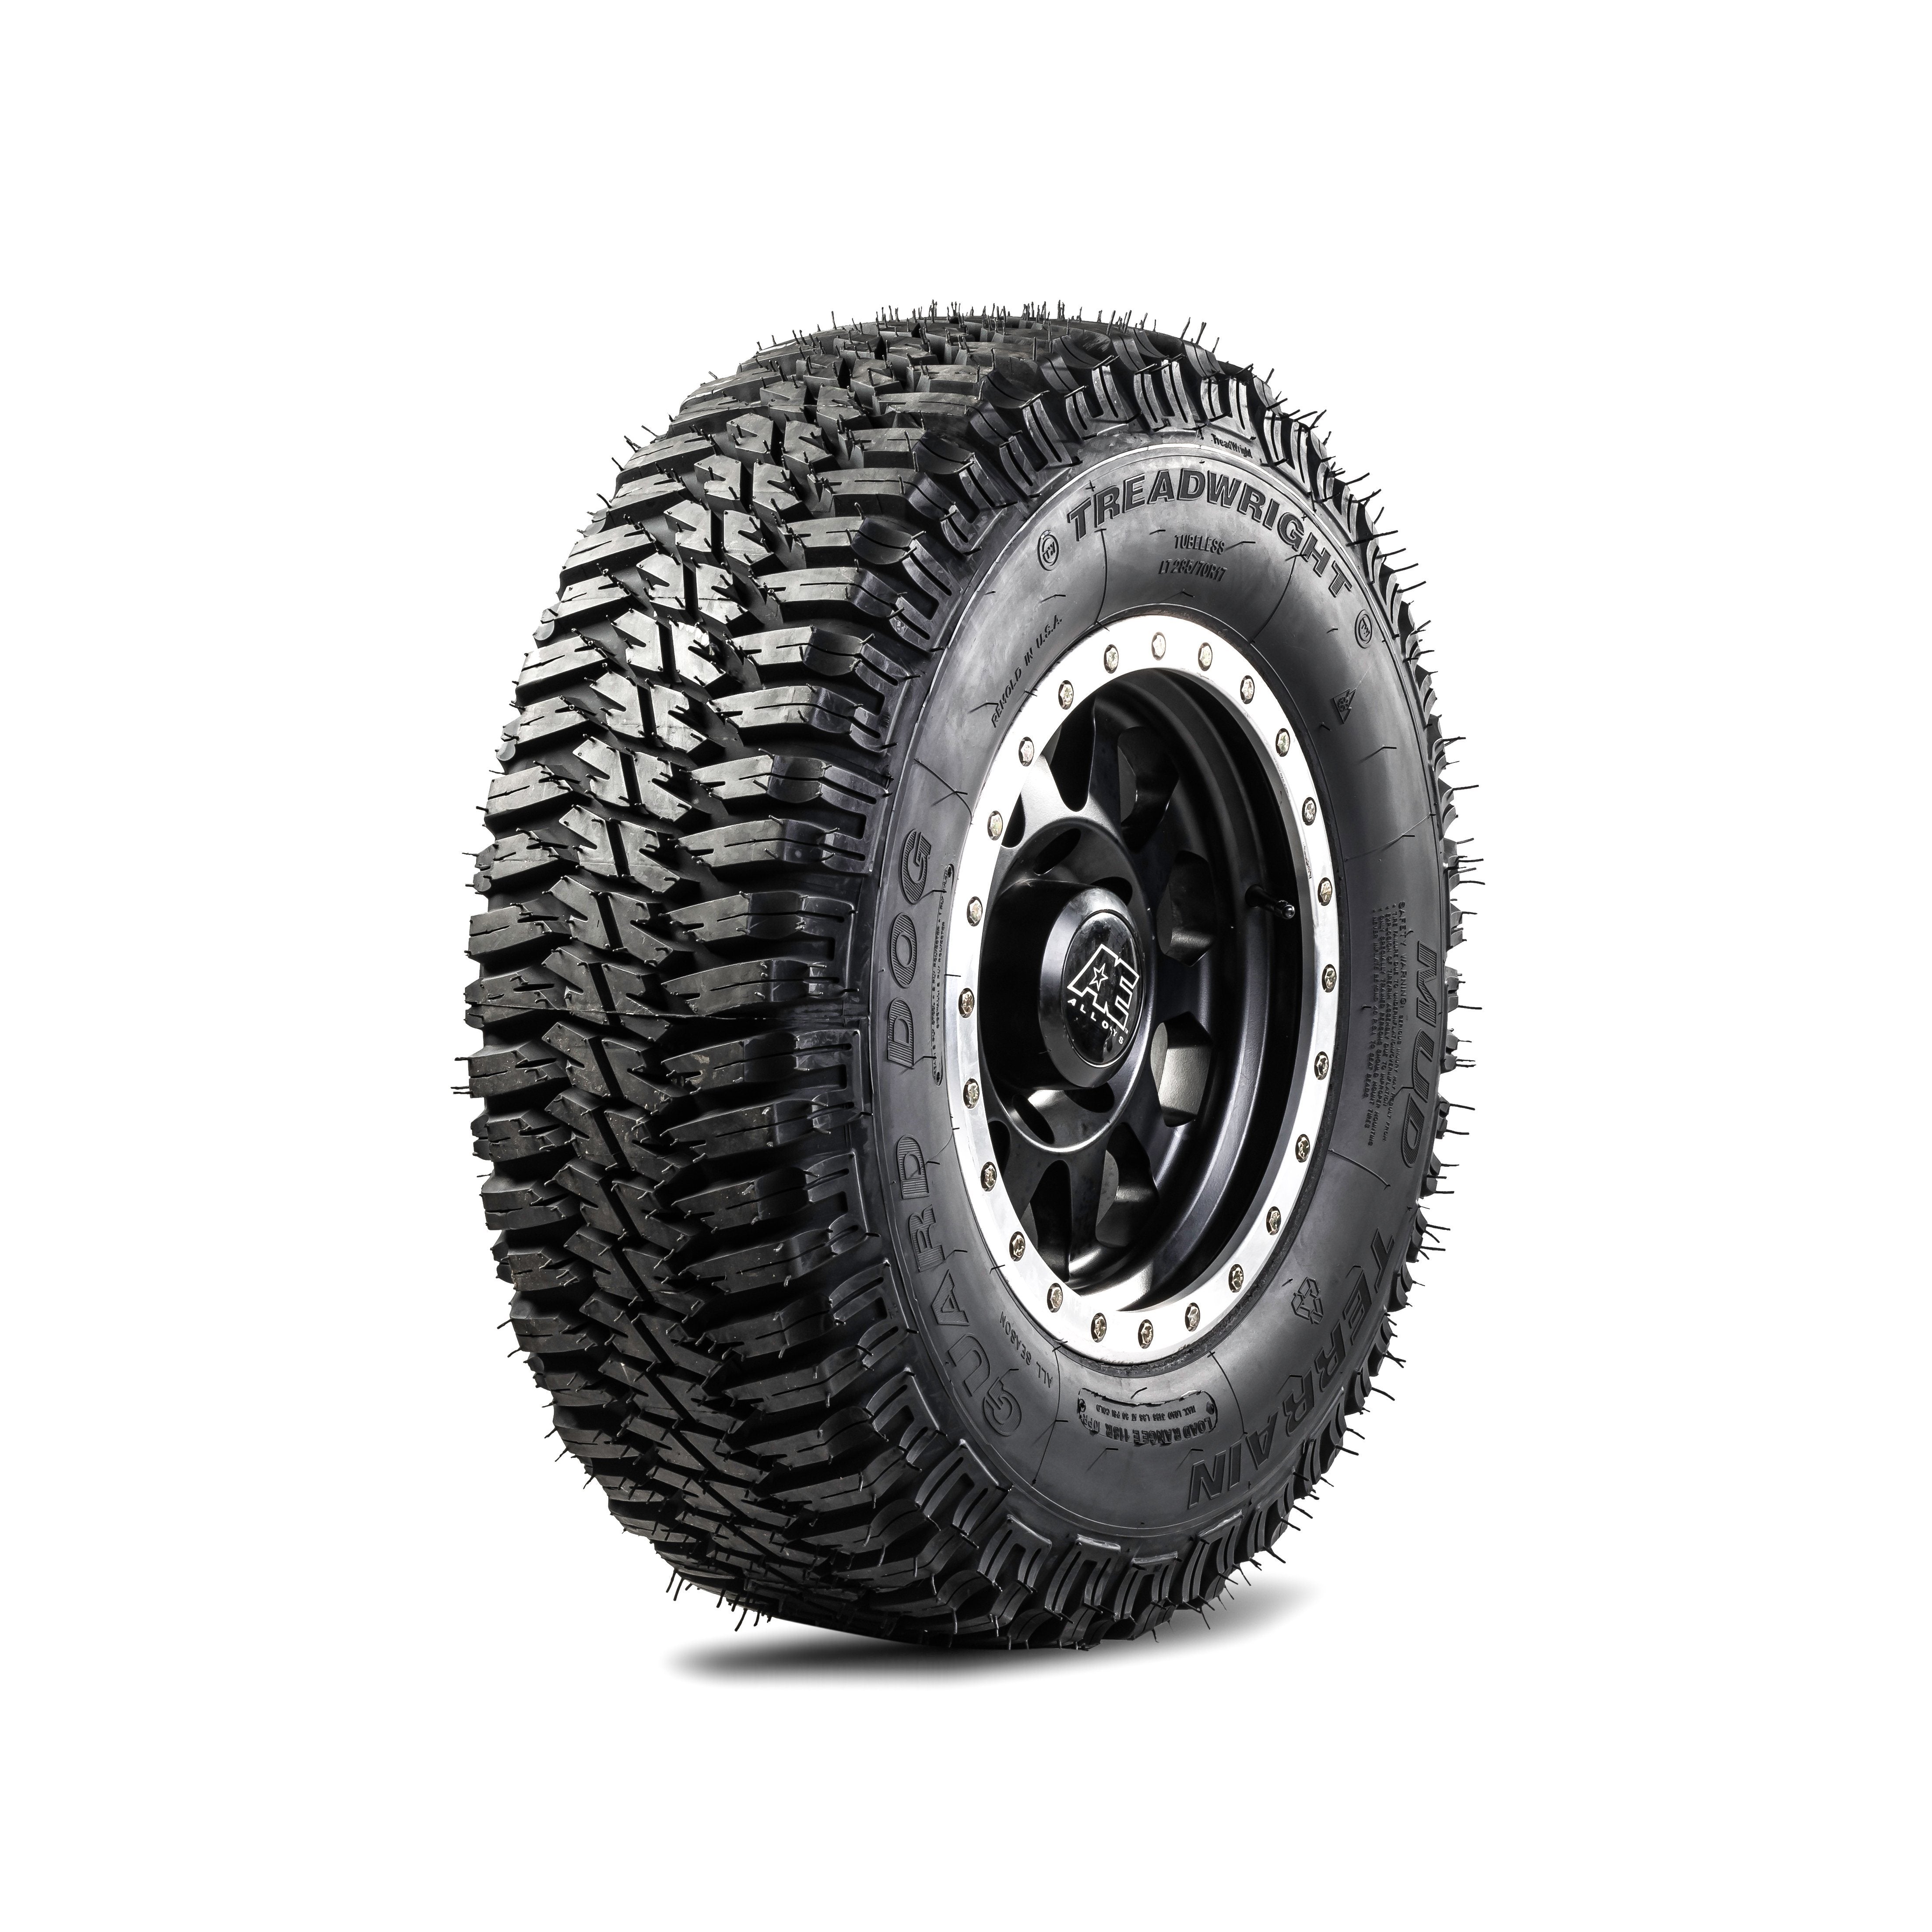 Buy TreadWright Guard Dog MT Remold Tires 245/70R19.5 14PLY Online –  TreadWright Tires